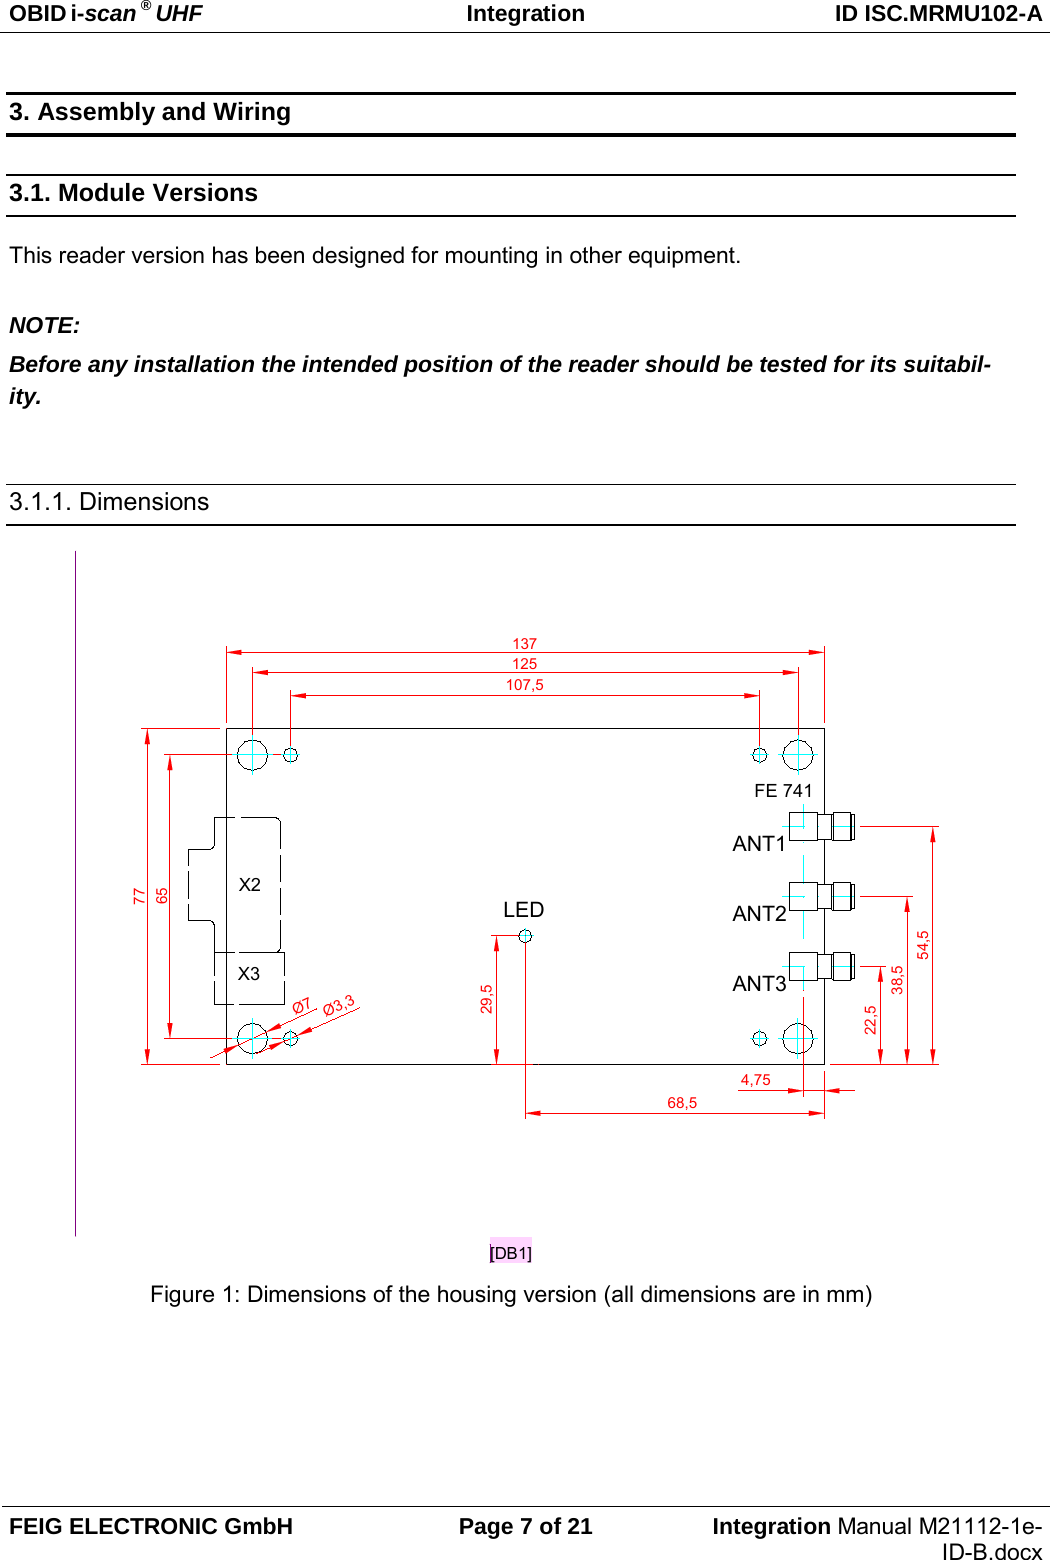 OBID i-scan ® UHF Integration ID ISC.MRMU102-A  FEIG ELECTRONIC GmbH Page 7 of 21 Integration Manual M21112-1e-ID-B.docx  3. Assembly and Wiring 3.1. Module Versions This reader version has been designed for mounting in other equipment.  NOTE: Before any installation the intended position of the reader should be tested for its suitabil-ity.  3.1.1. Dimensions  77137Ø3,3Ø7125107,565LEDANT1FE 74168,554,529,5X2X338,5ANT222,5ANT34,75[DB1] Figure 1: Dimensions of the housing version (all dimensions are in mm)  